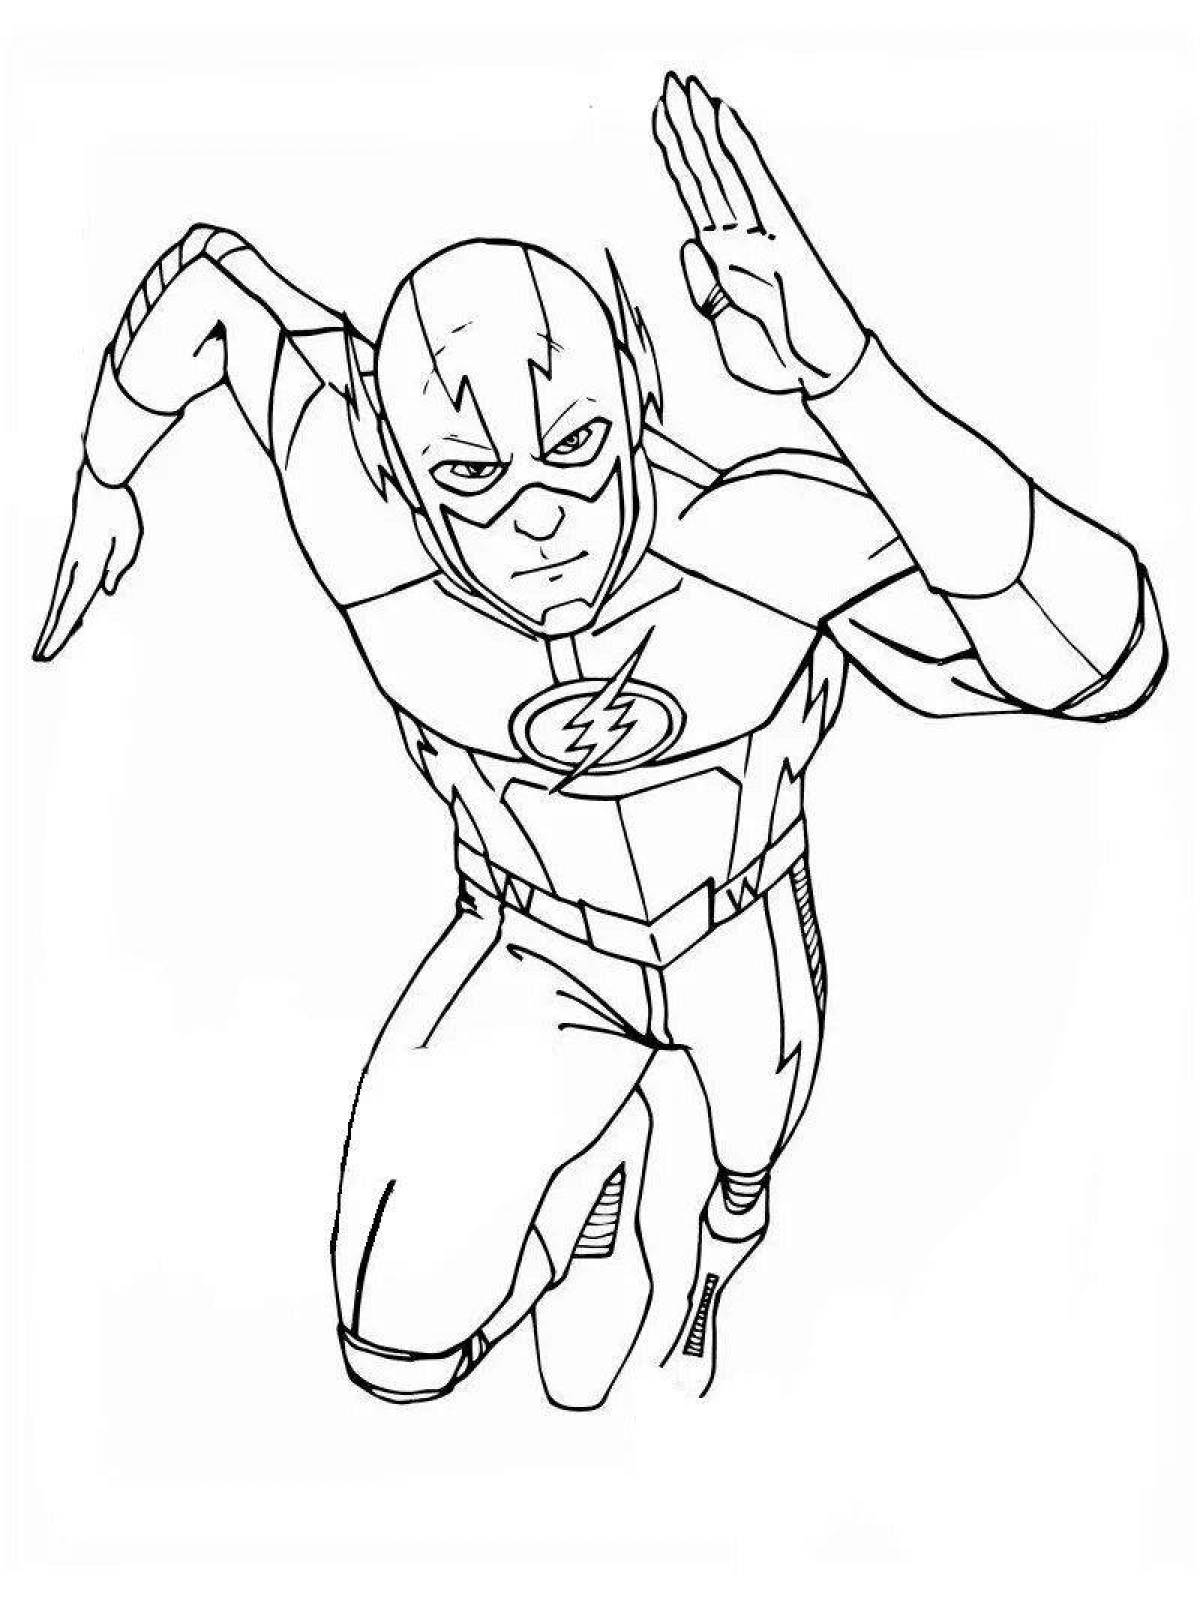 Colorful flash coloring page